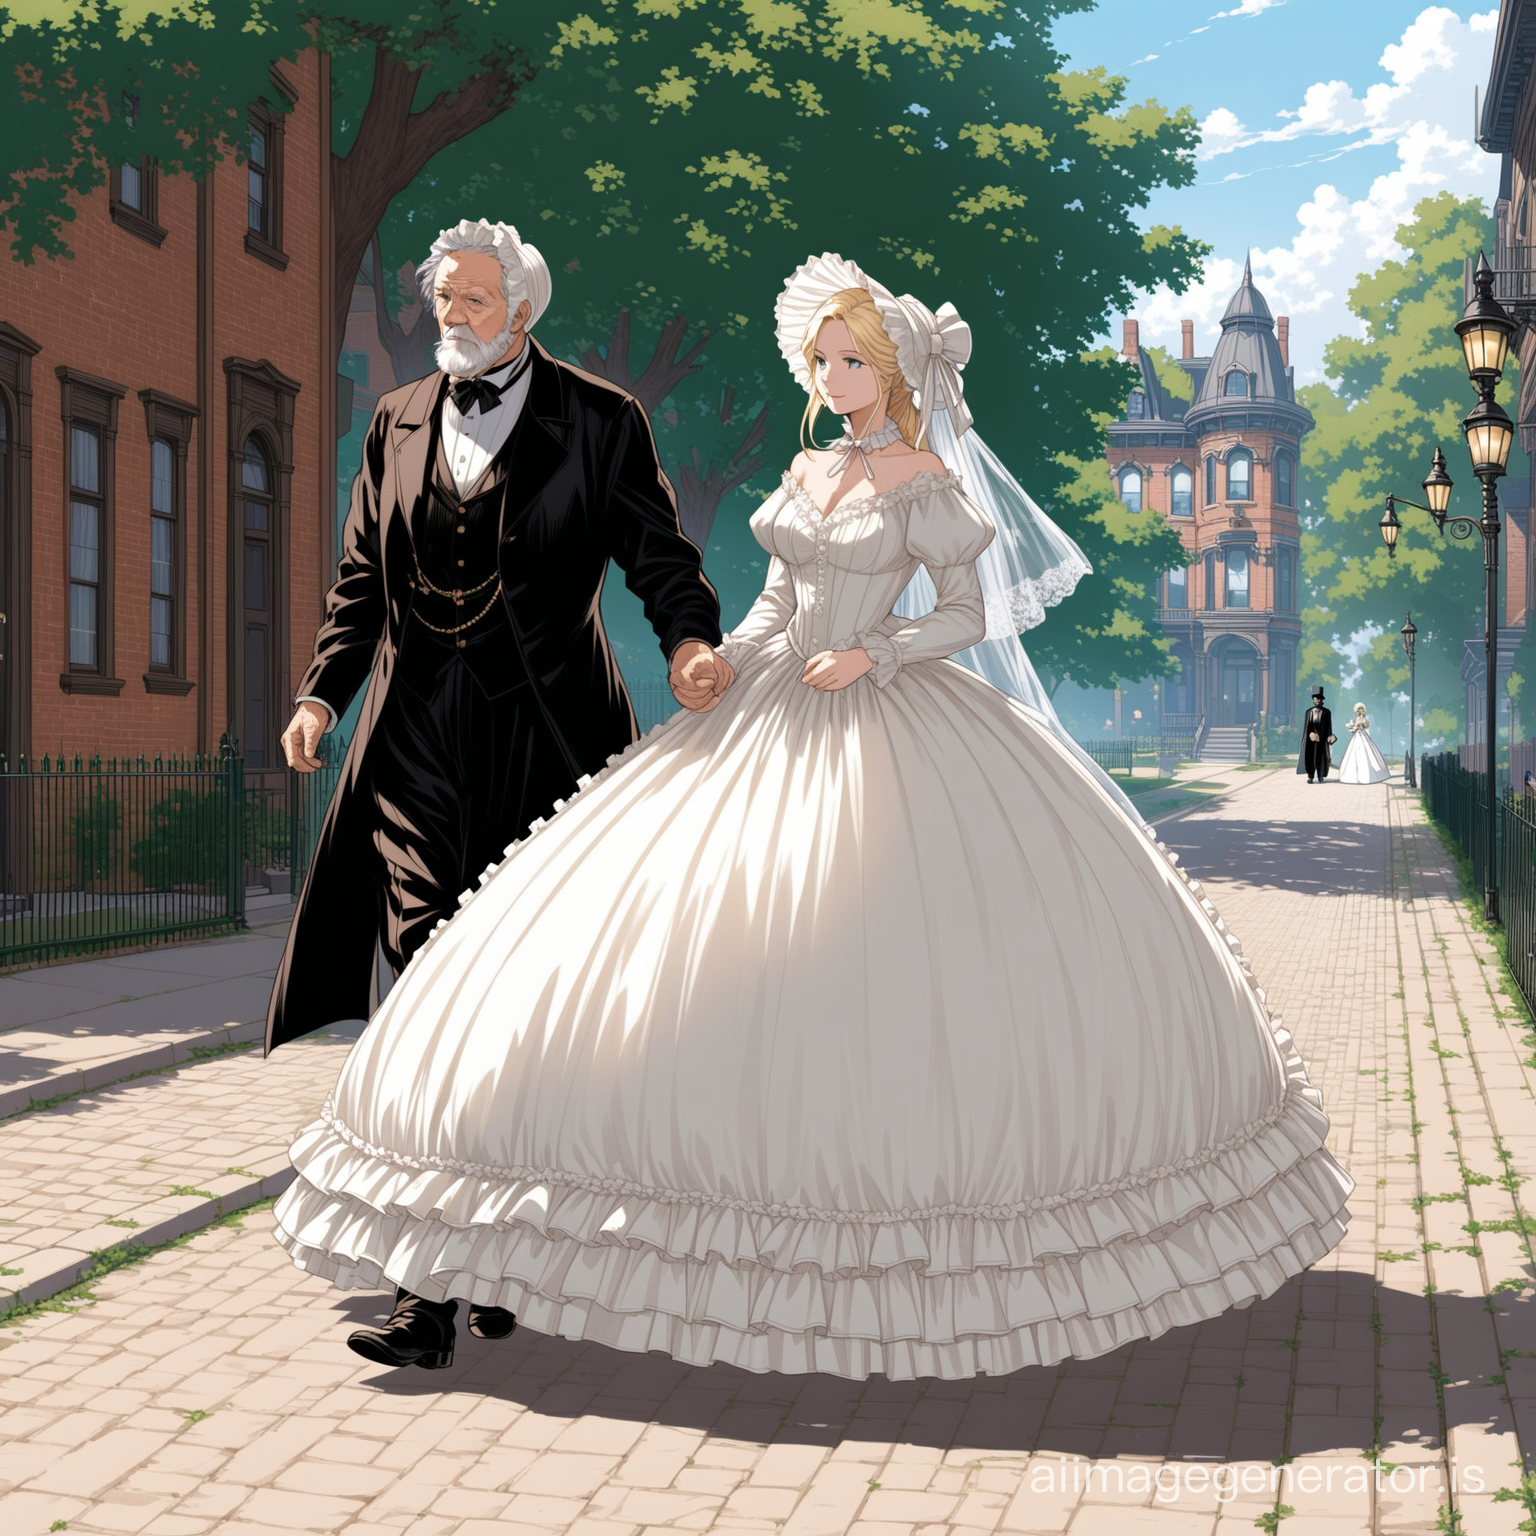 Susan Storm from the FF4 wearing a black floor-length loose billowing 1860 Victorian crinoline poofy dress with a frilly bonnet walking on a Victorian era sidewalk with an old man dressed into a black Victorian suit who seems to be her newlywed husband